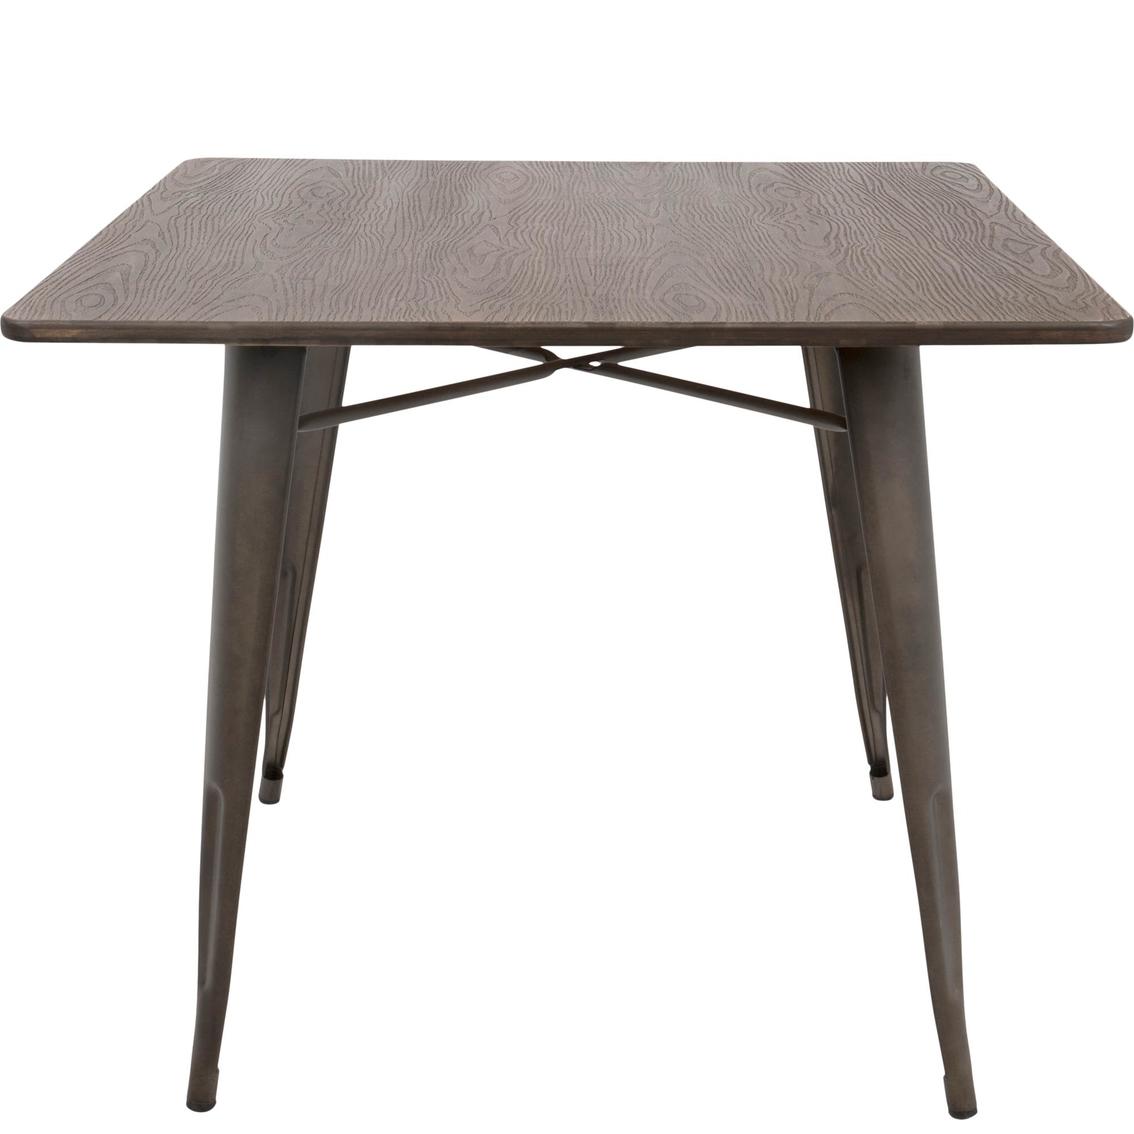 LumiSource Oregon Square Dining Table - Image 2 of 3